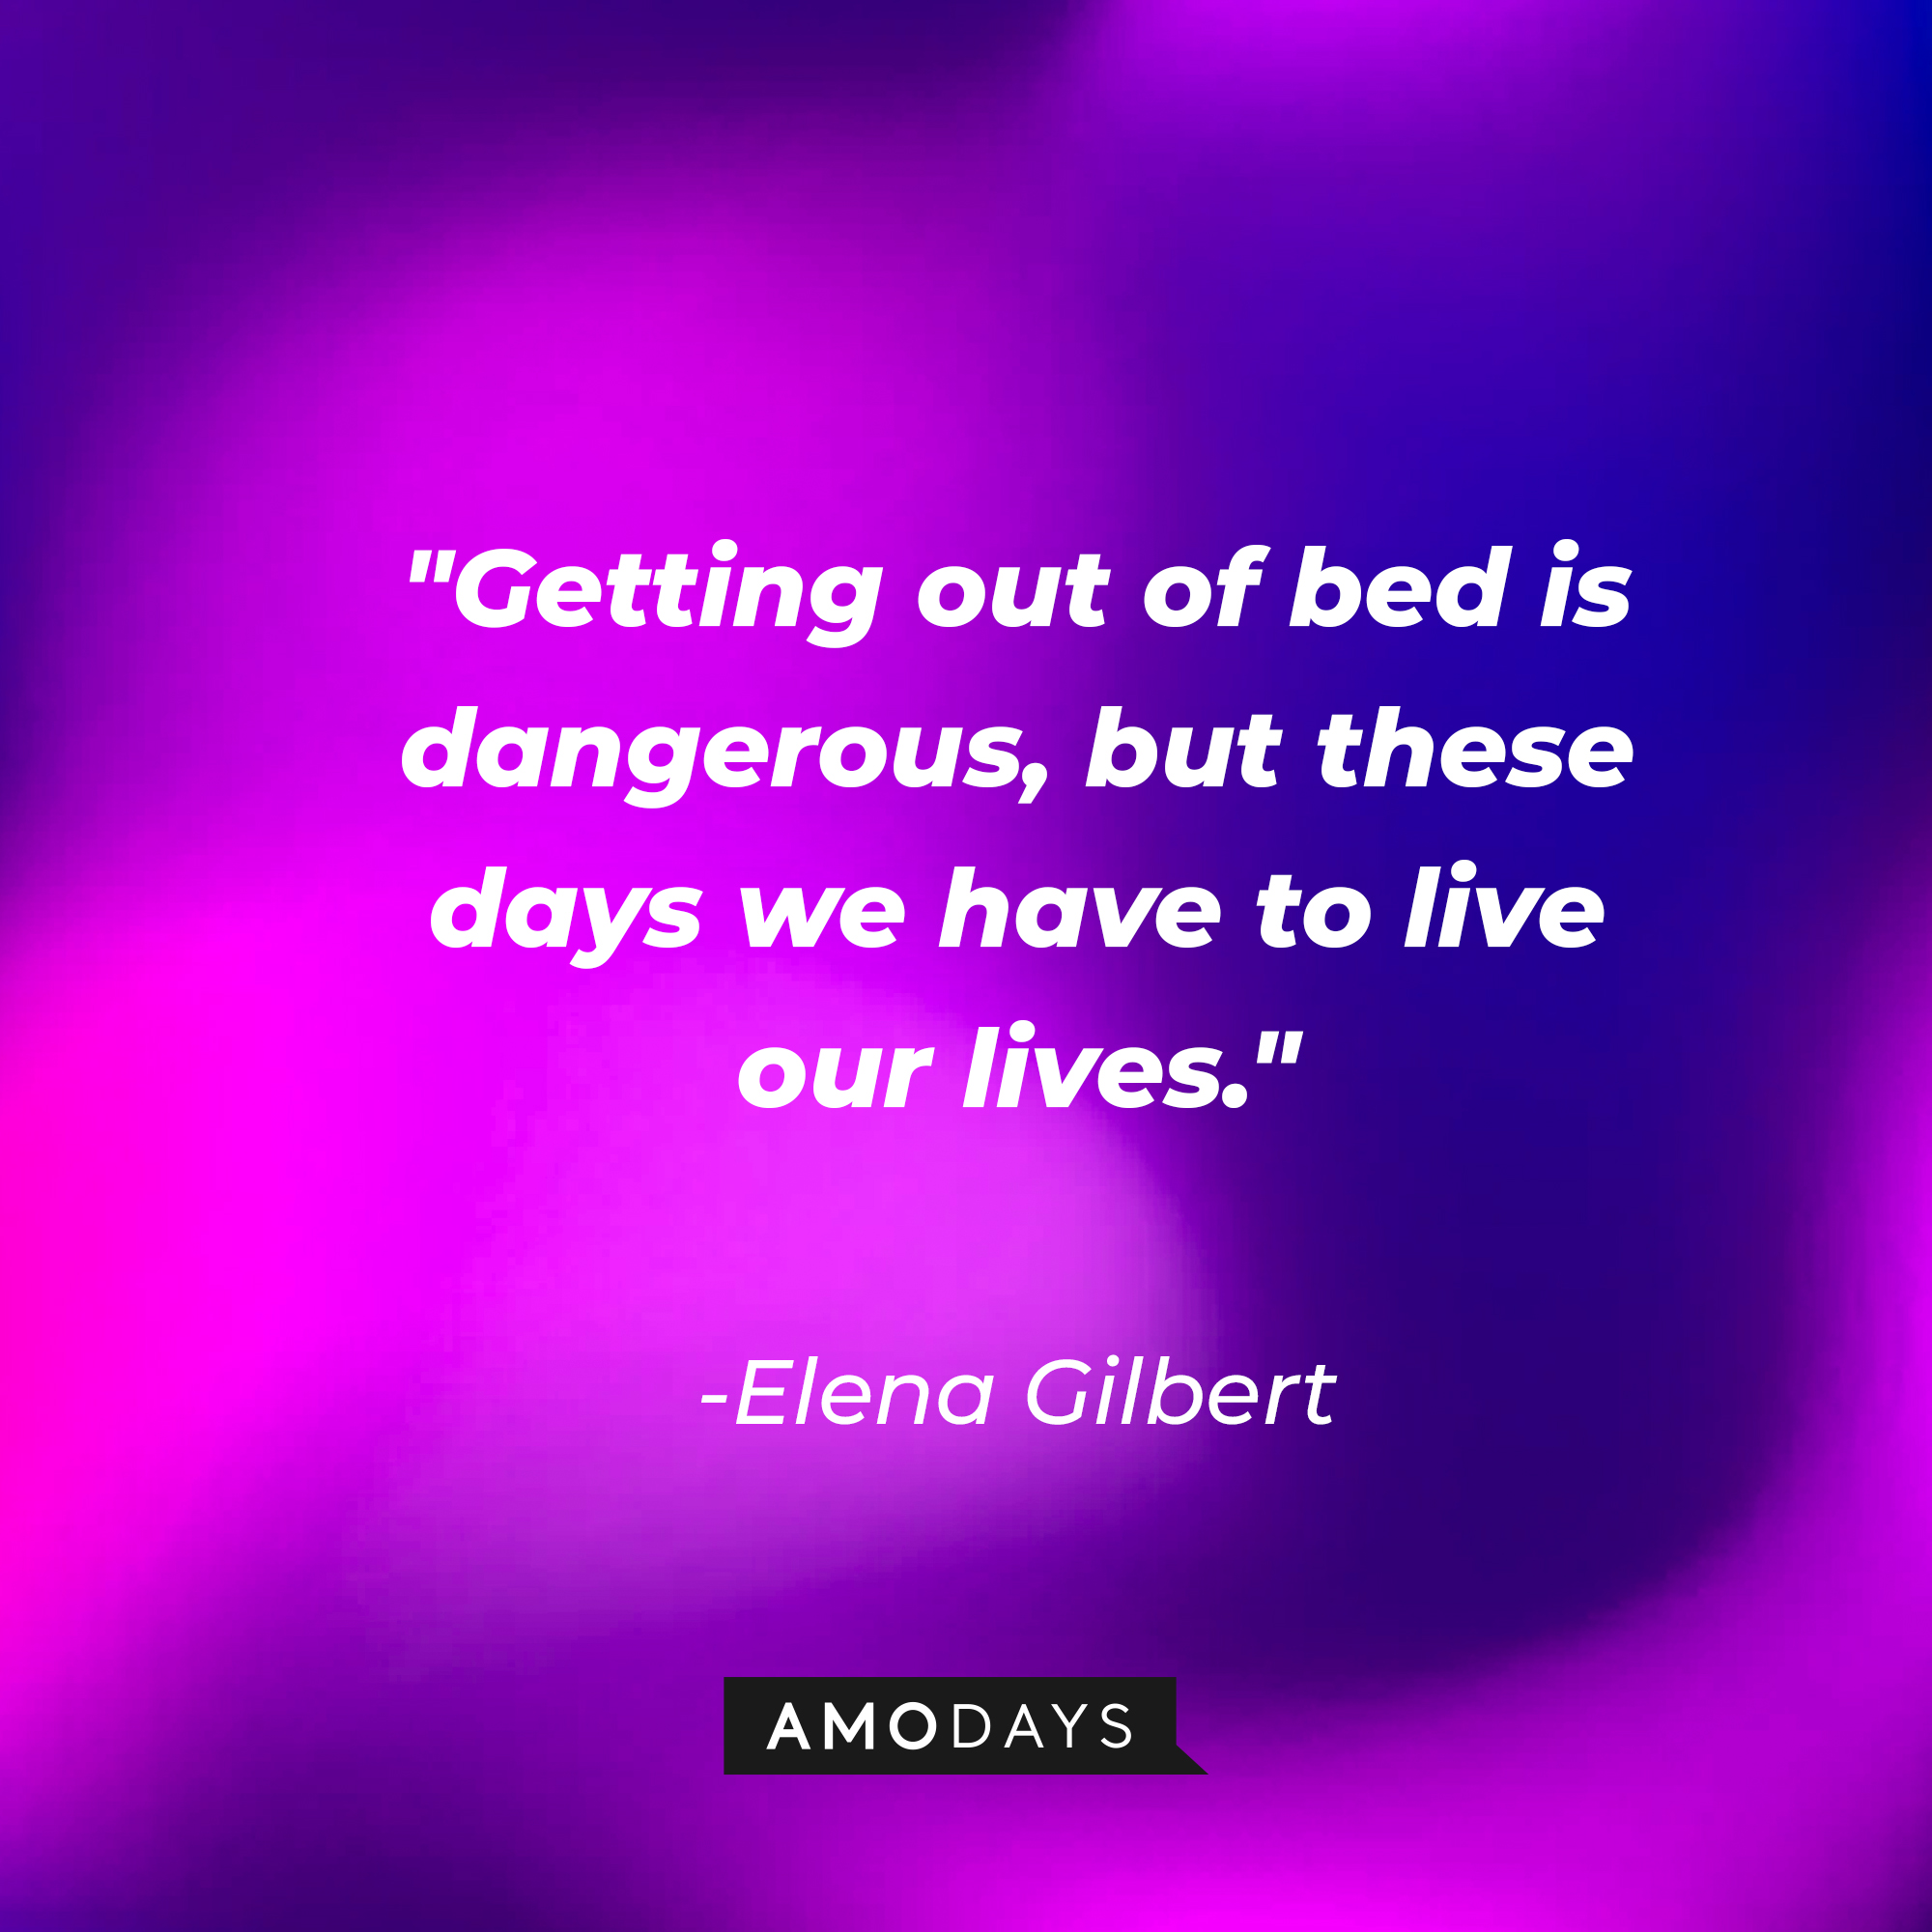 Elena Gilbert's quote: "Getting out of bed is dangerous, but these days we have to live our lives." | Source: Amodays